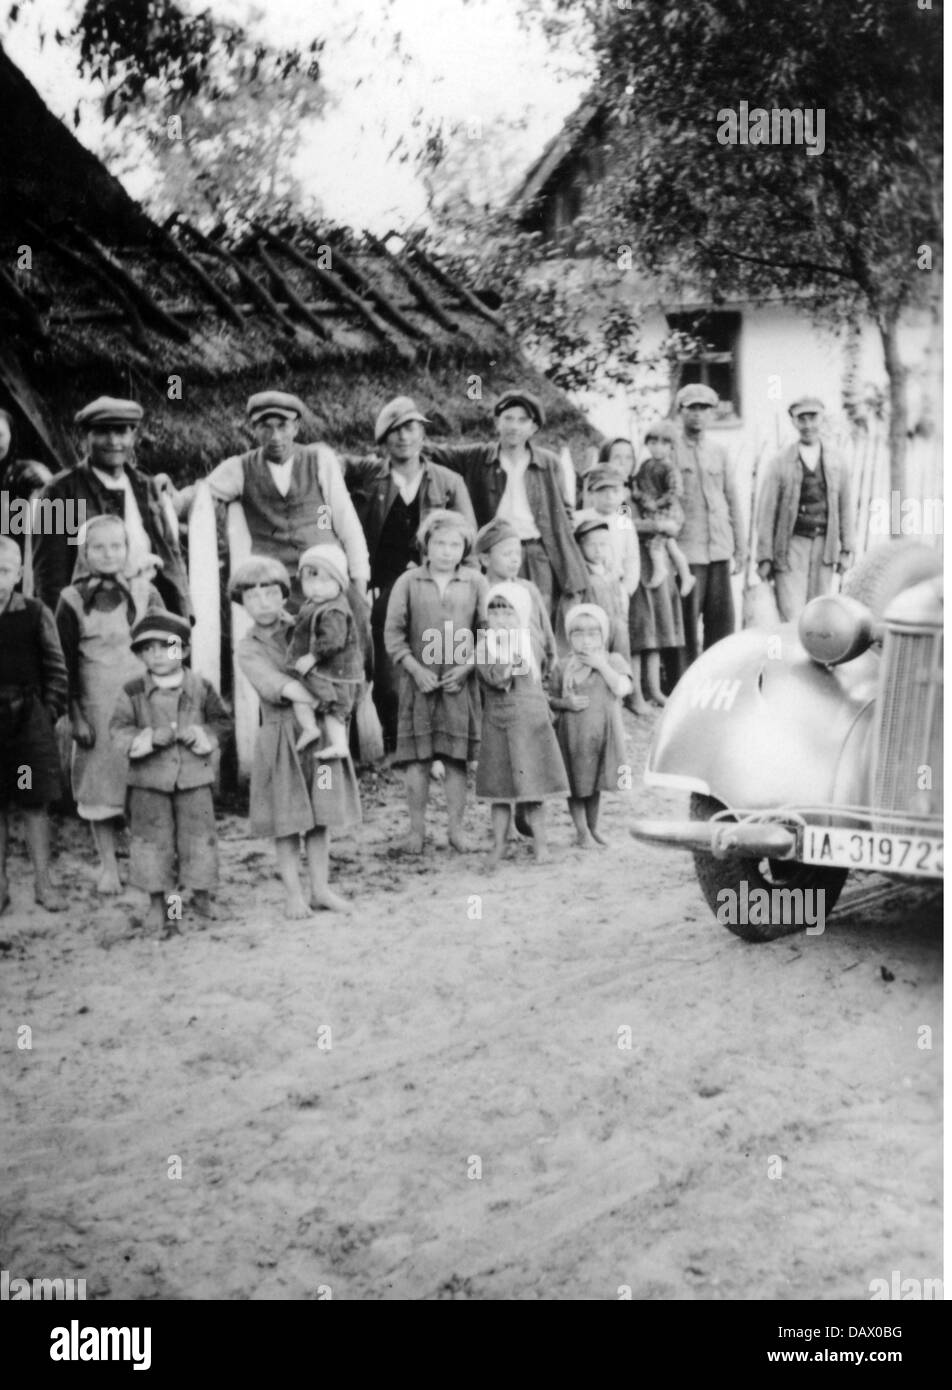 Second World War / WWII, Soviet Union, Ukrainian civilians beside a road watching a passing unit of the German Reich Labour Service (Reichsarbeitsdienst), Army Group South (RAD Abteilung K. 1/130), summer 1941, Additional-Rights-Clearences-Not Available Stock Photo